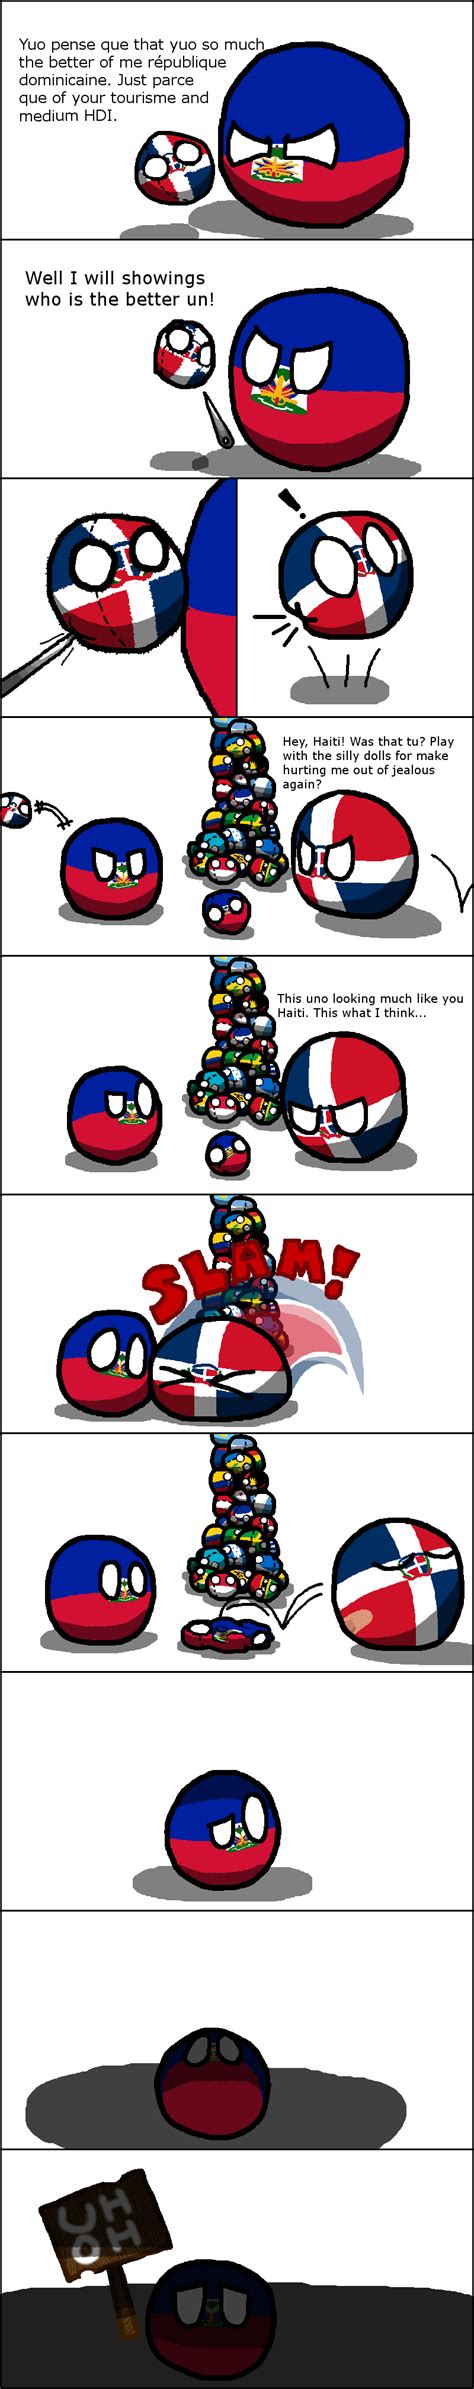 From wikimedia commons, the free media repository. Imagen - Lo que el vudú puede hacer.png | Wiki Polandball ...